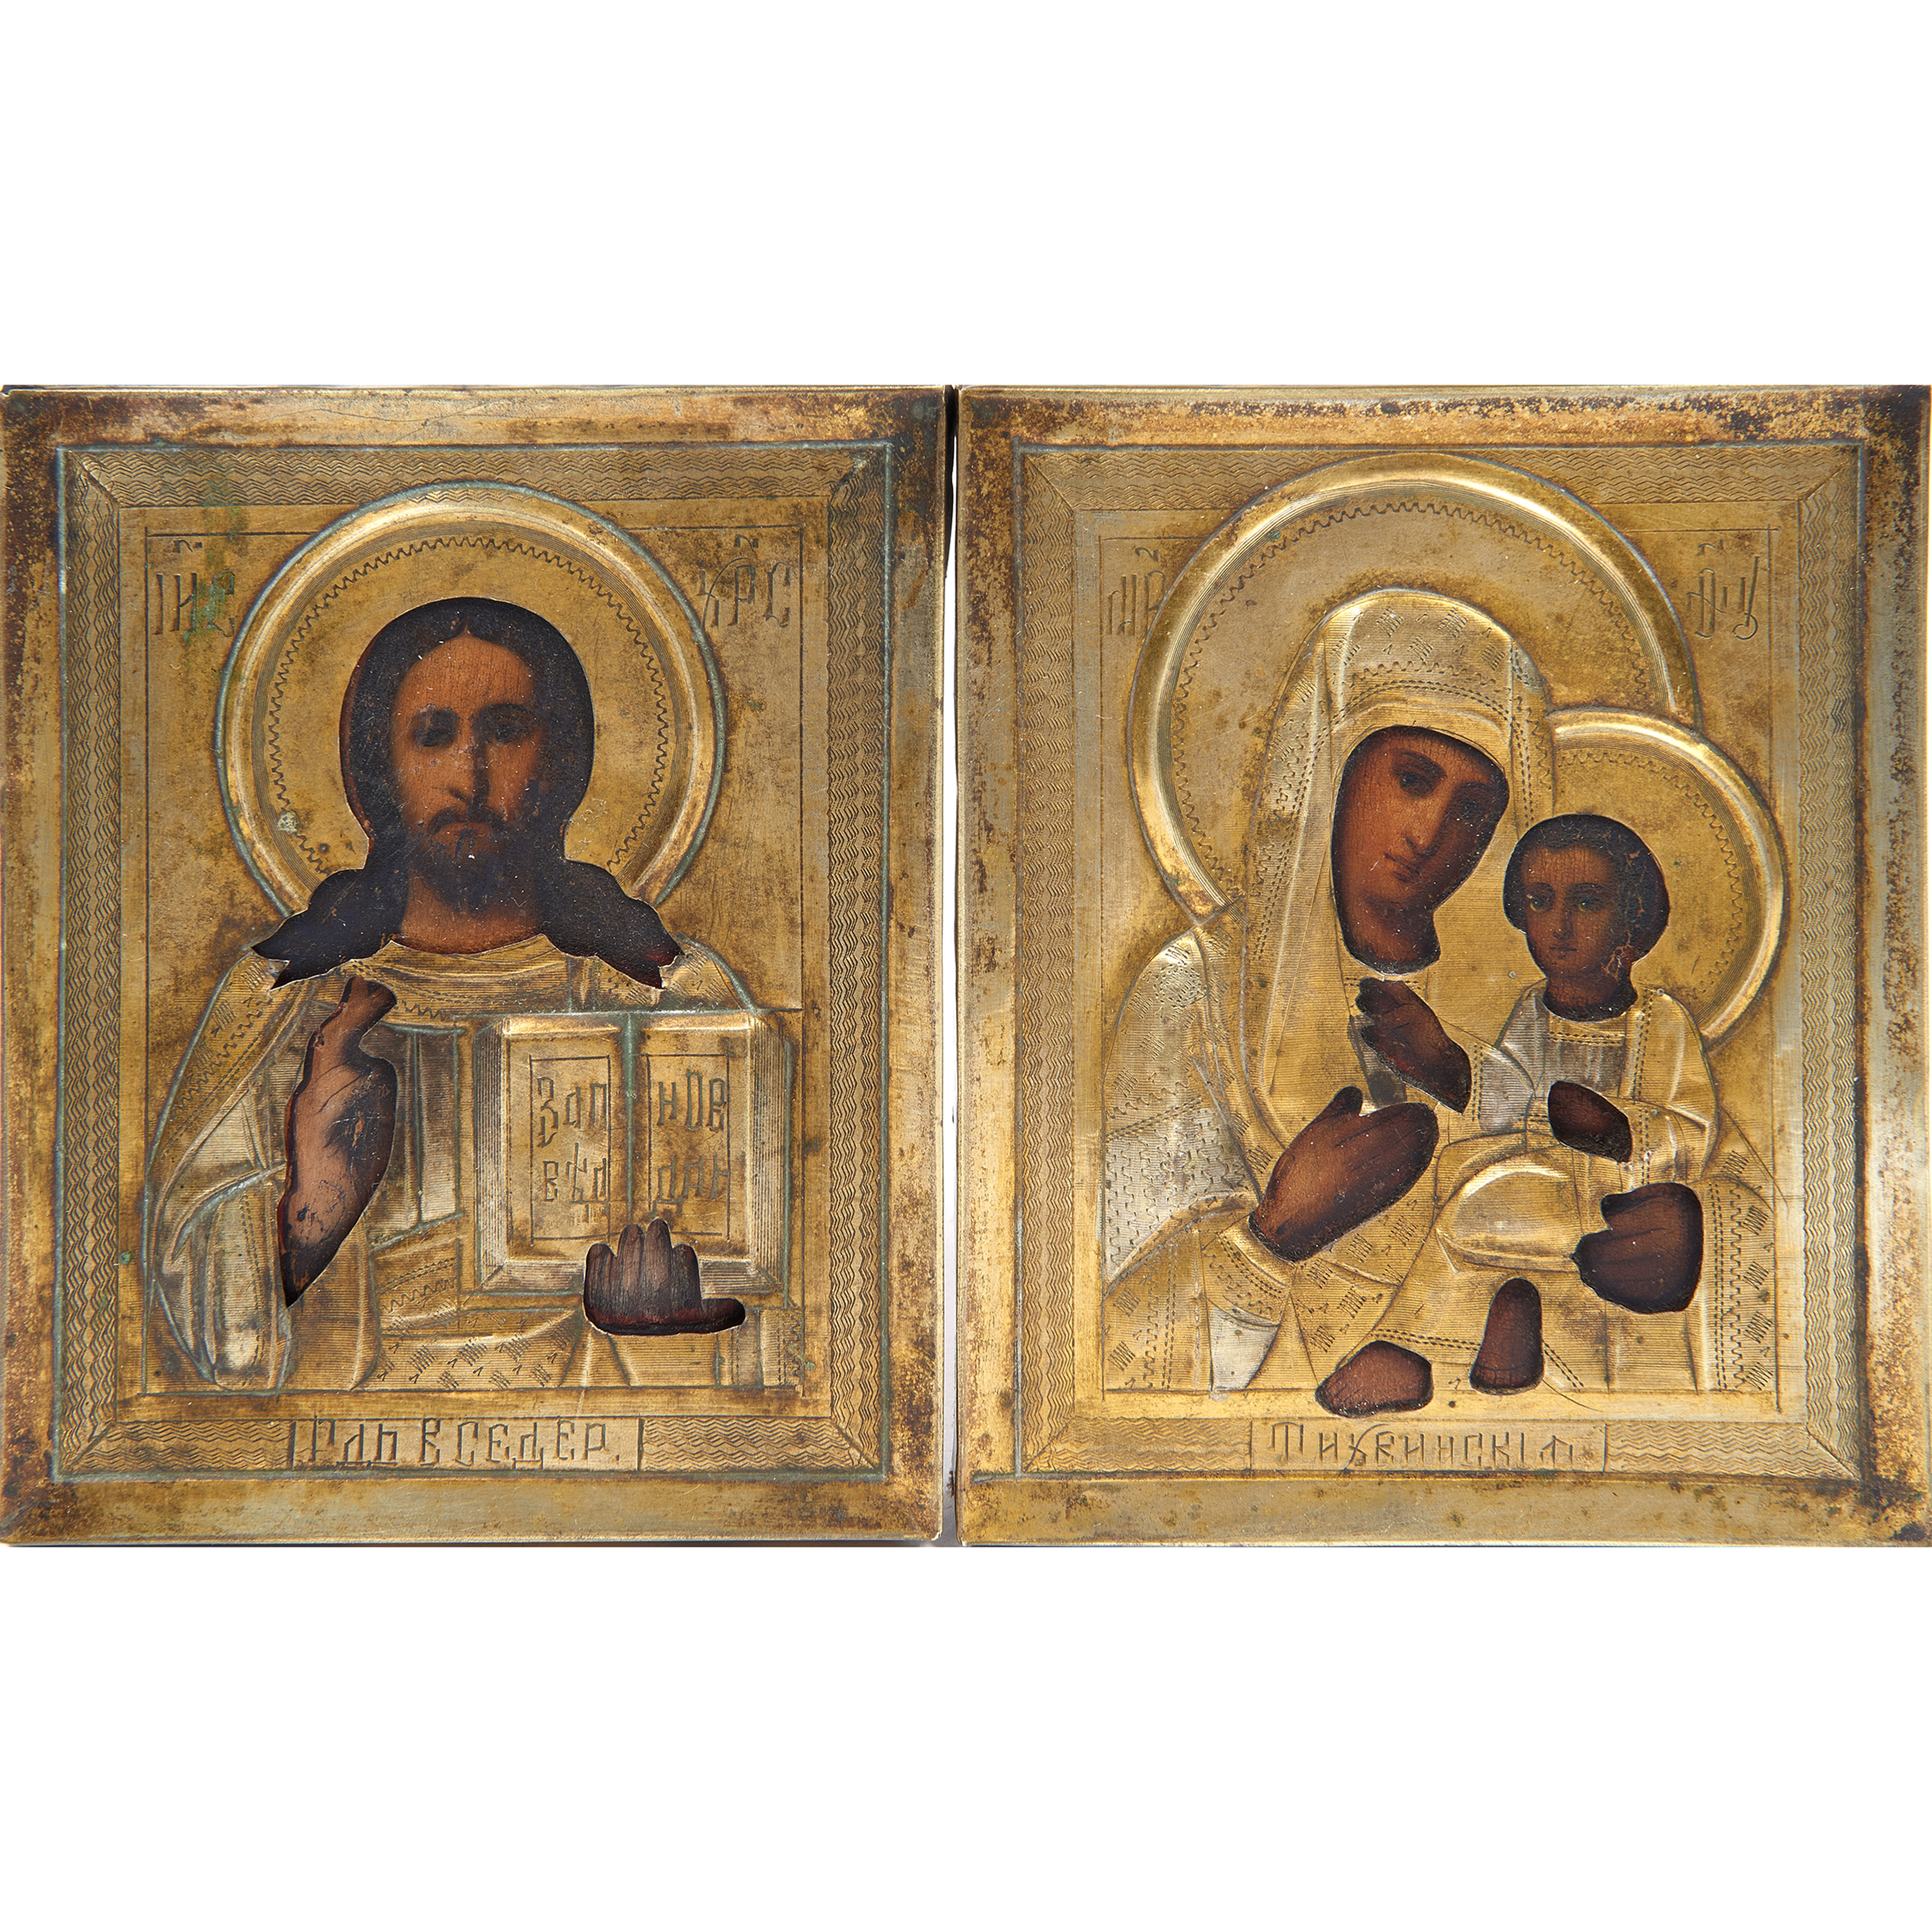 A PAIR OF RUSSIAN BRASS OKLAD ICONS 3a6832